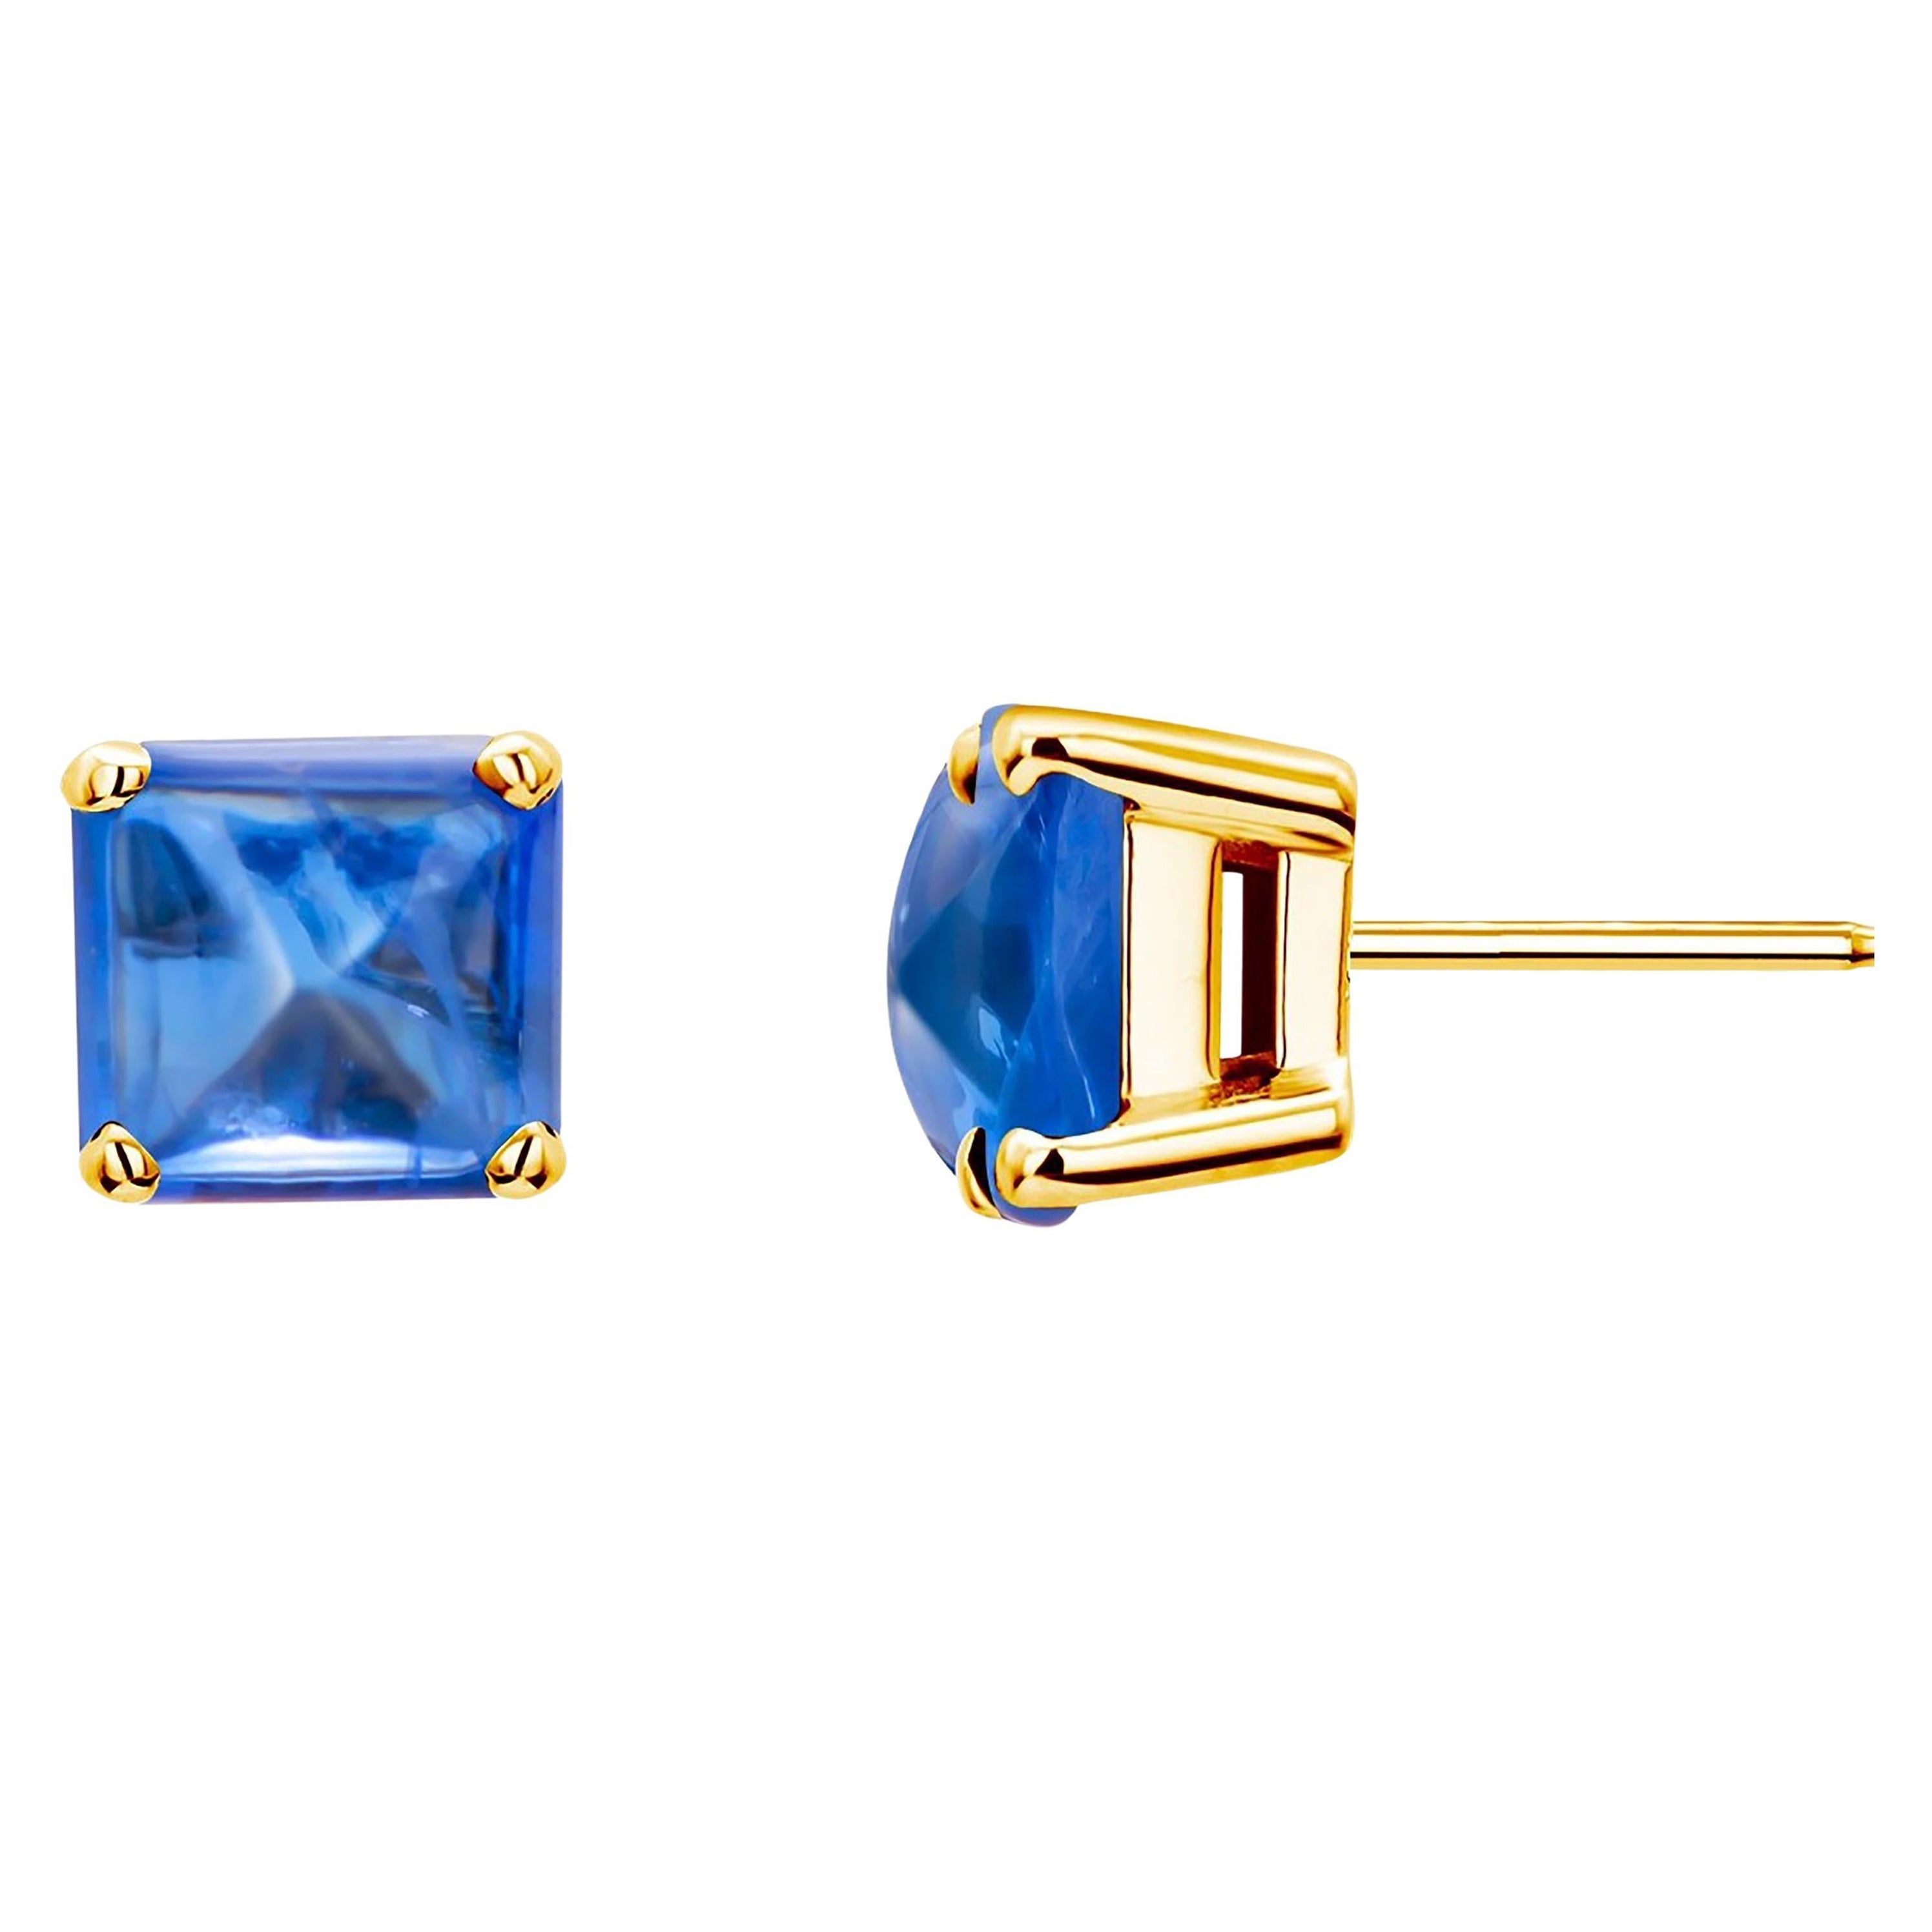 Sugarloaf Ceylon Cabochon Sapphire 1.20 Carat Yellow Gold 0.17 Inch Earrings